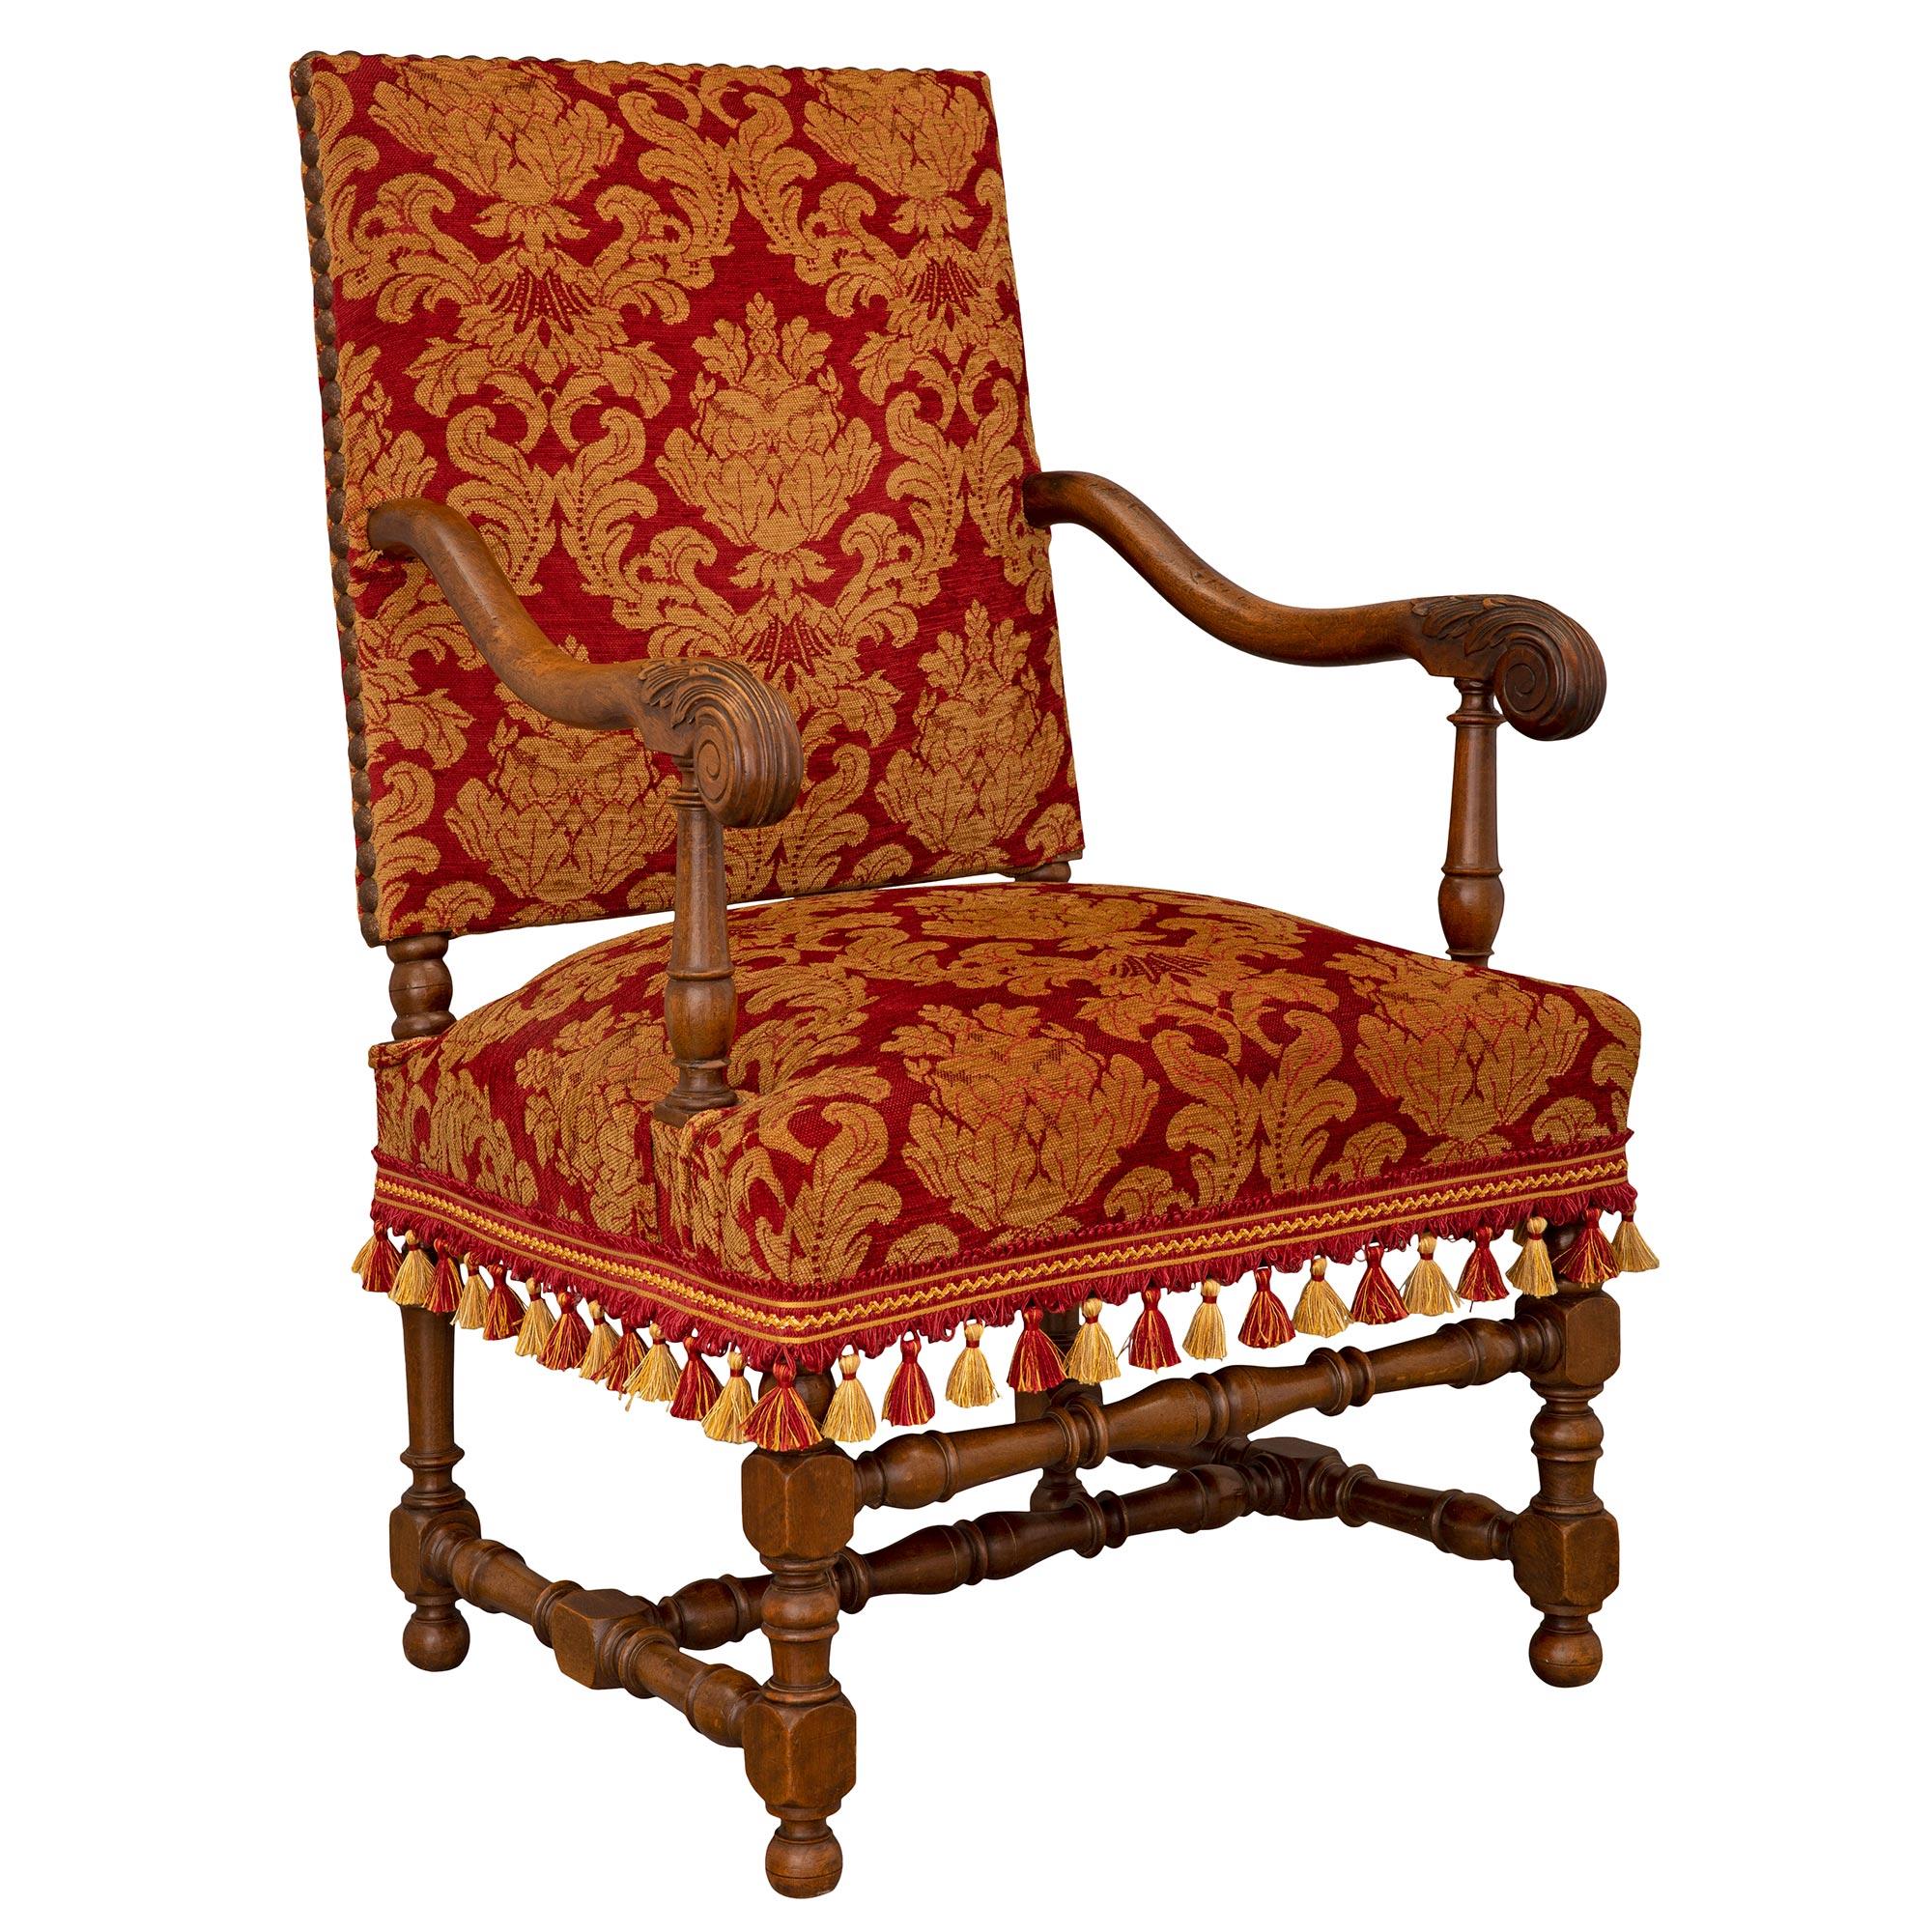 A handsome and most impressive pair of French 19th century Louis XIII st. oak armchairs. Each armchair is raised by fine ball feet below block and turned legs and beautifully turned and mottled stretchers. The arms display elegant and most